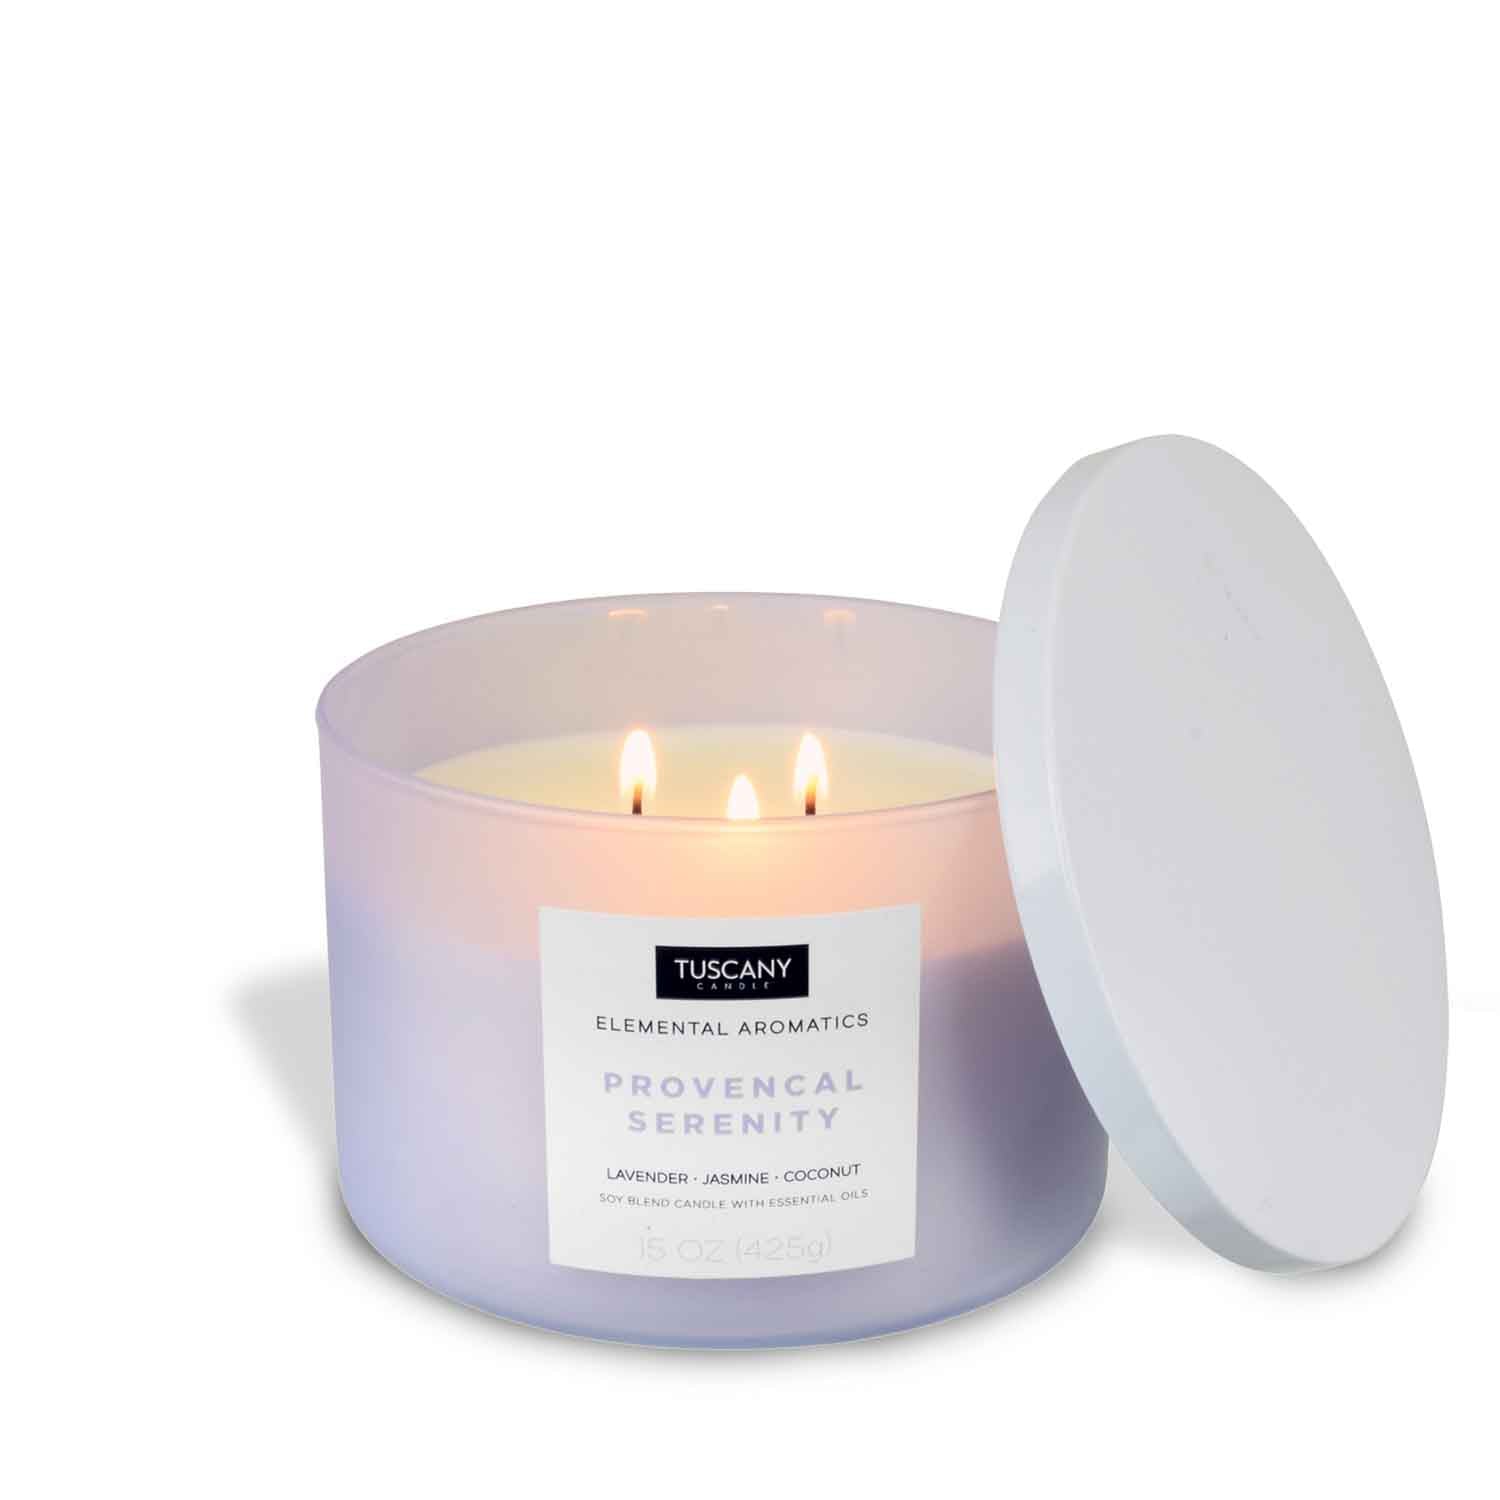 A Provencal Serenity scented candle in a white container with a lid, perfect for relaxation. (Brand: Tuscany Candle)